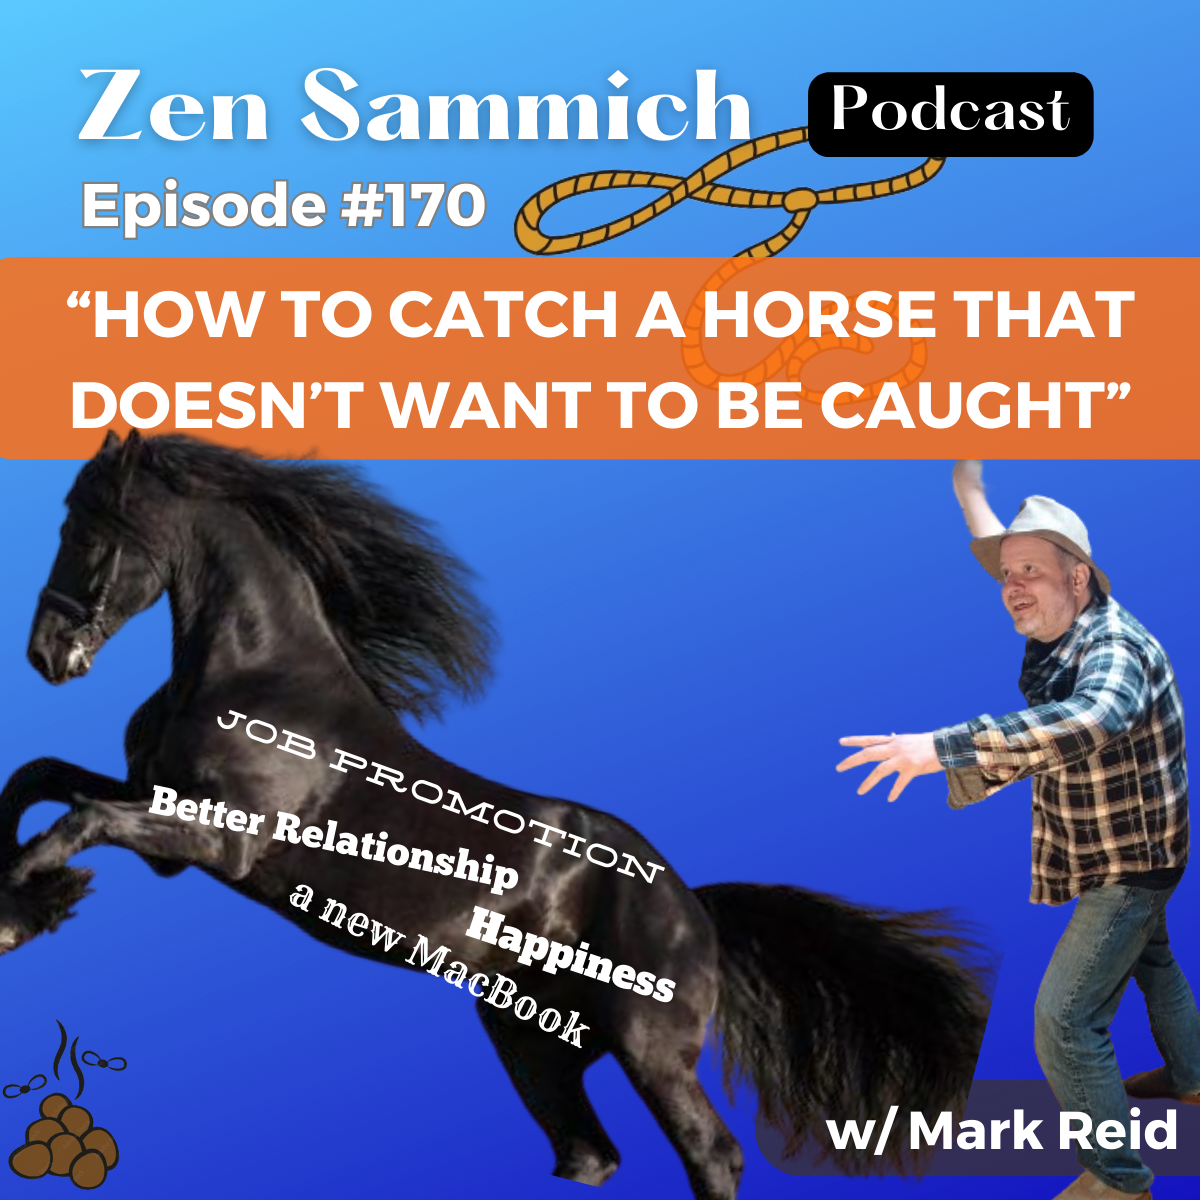 How To Catch A Horse That Doesn't Want To Be Caught Zen Sammich